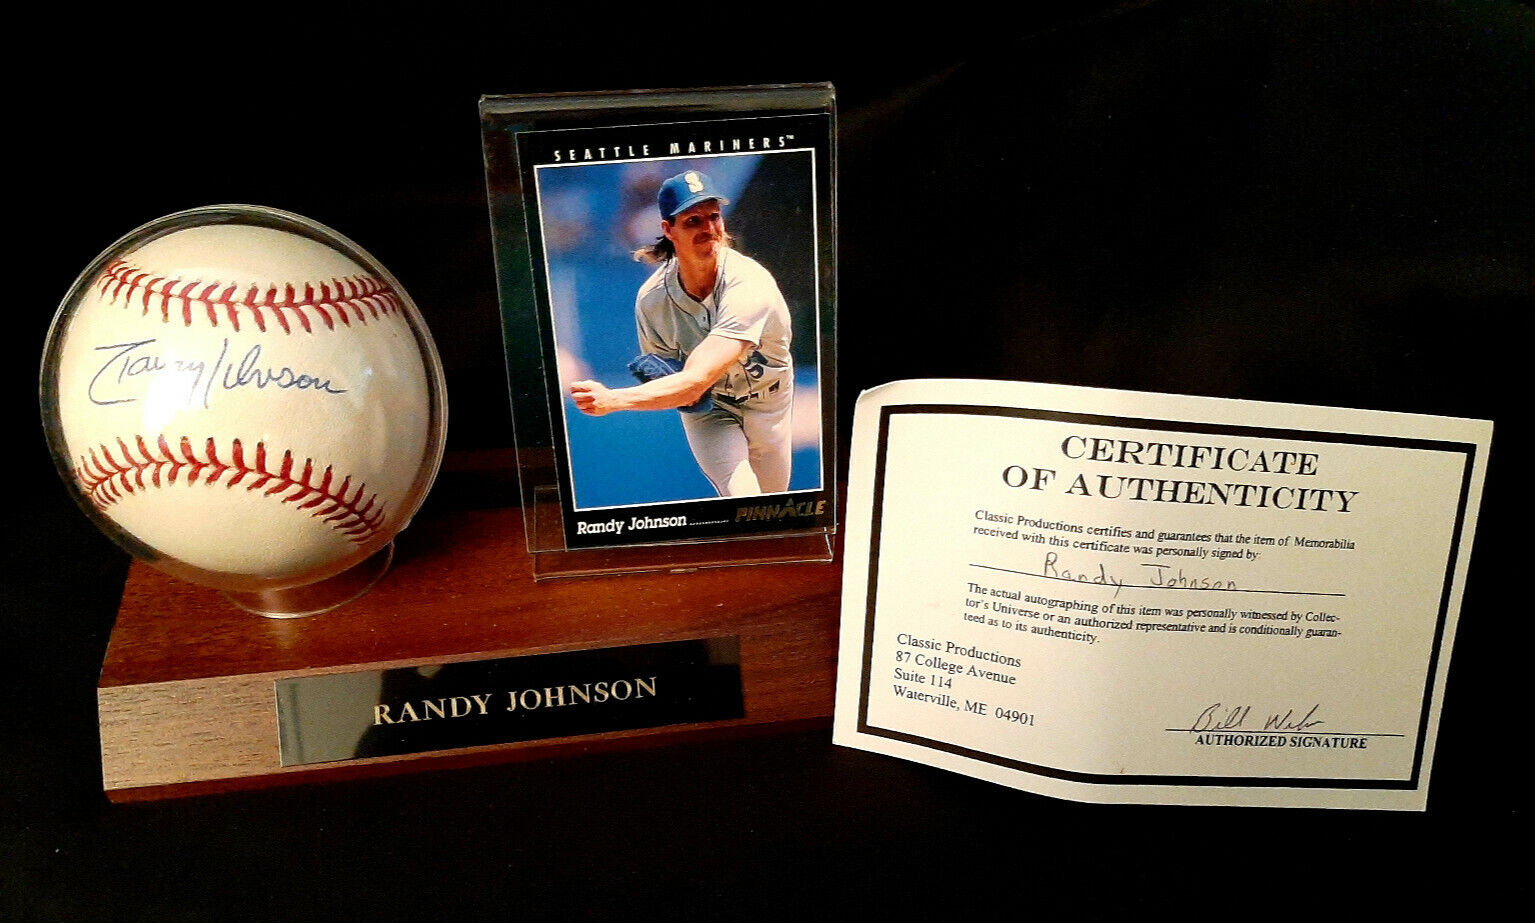 RANDY JOHNSON AUTOGRAPHED MLB BASEBALL MARINERS w/Certificate of Authenticity